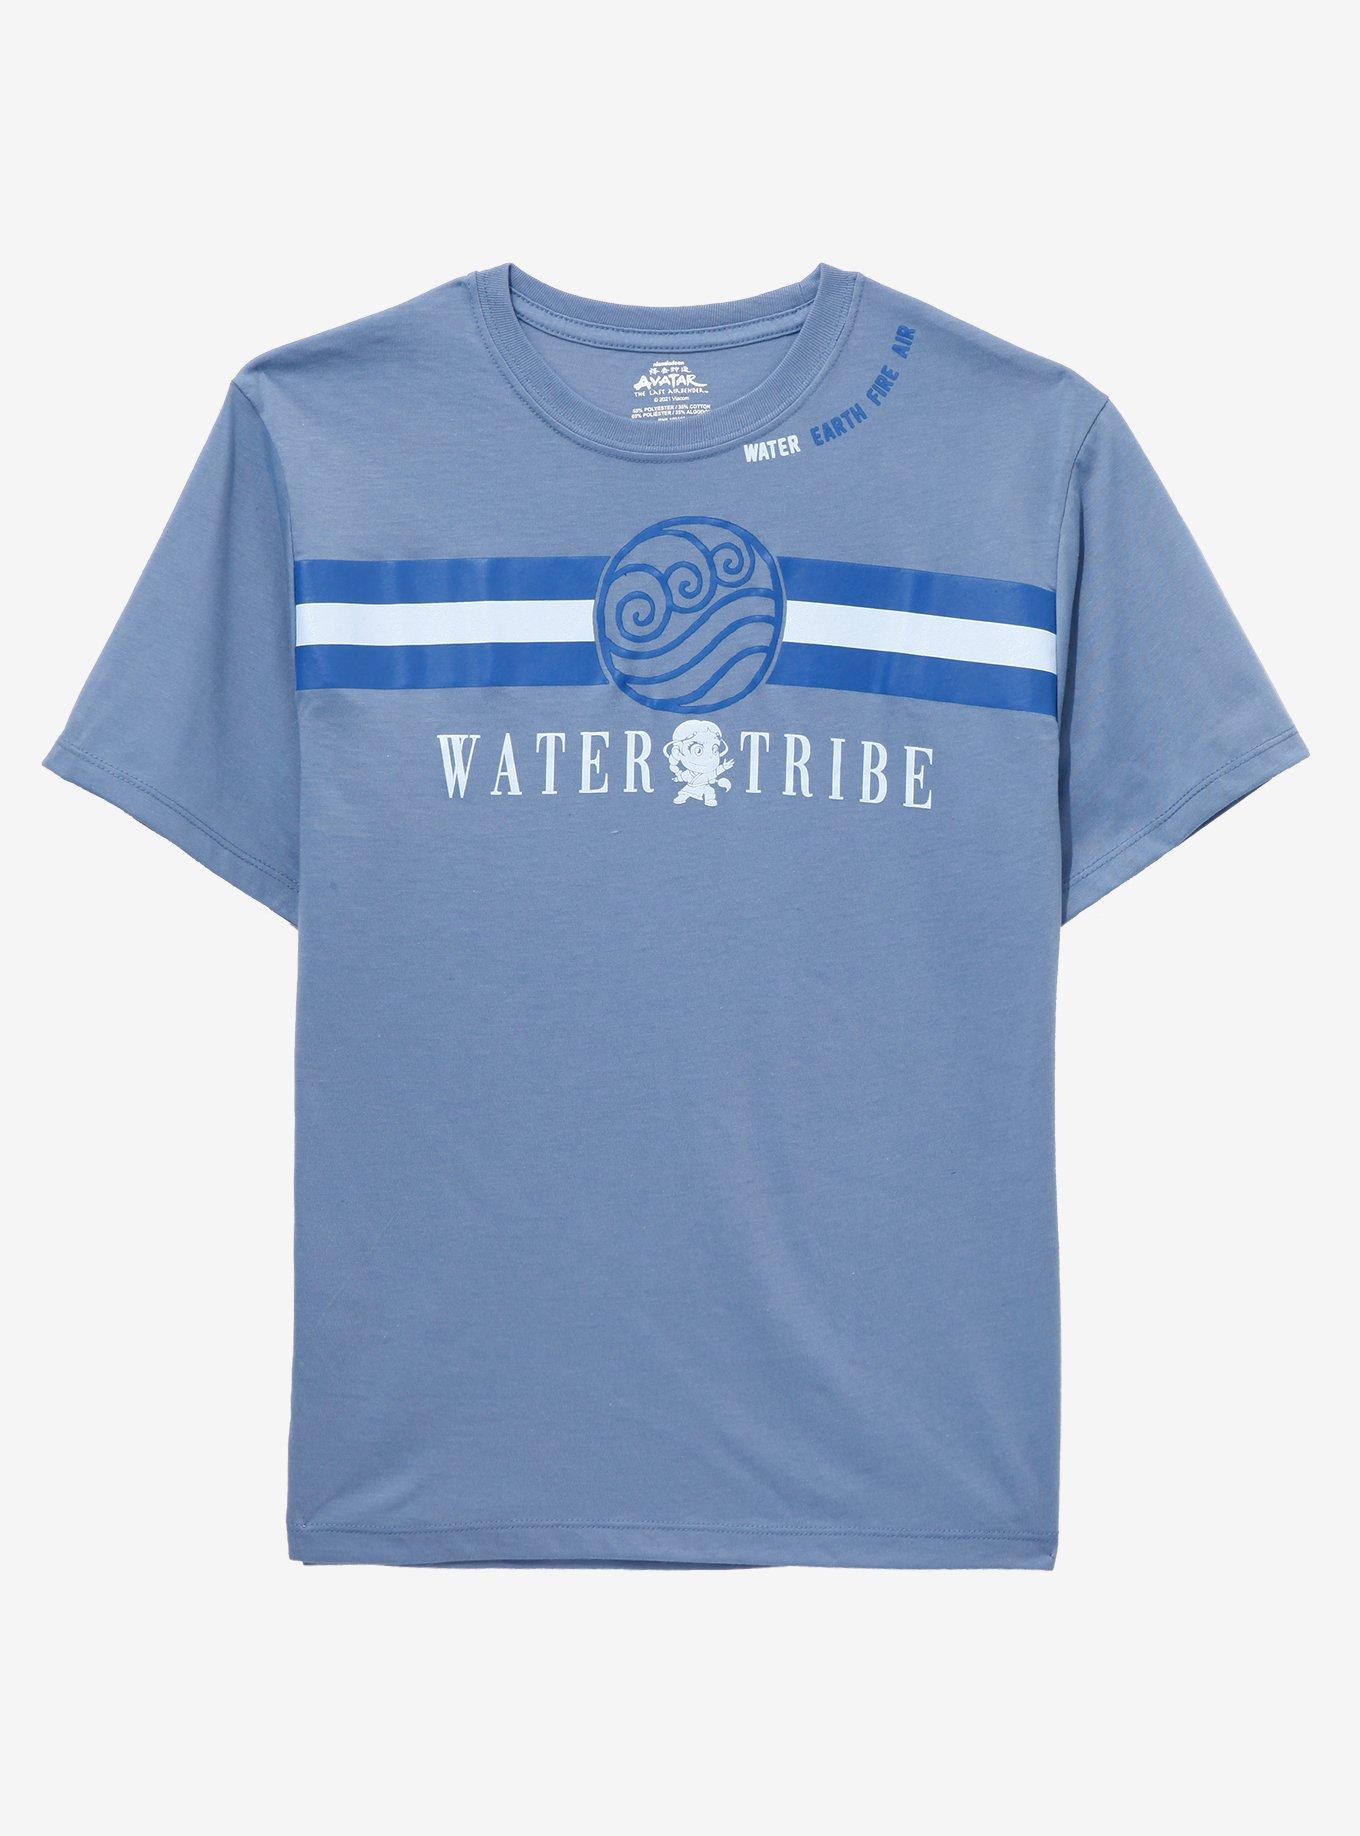 Avatar: The Last Airbender Water Tribe Youth T-Shirt - BoxLunch Exclusive, BLUE, hi-res